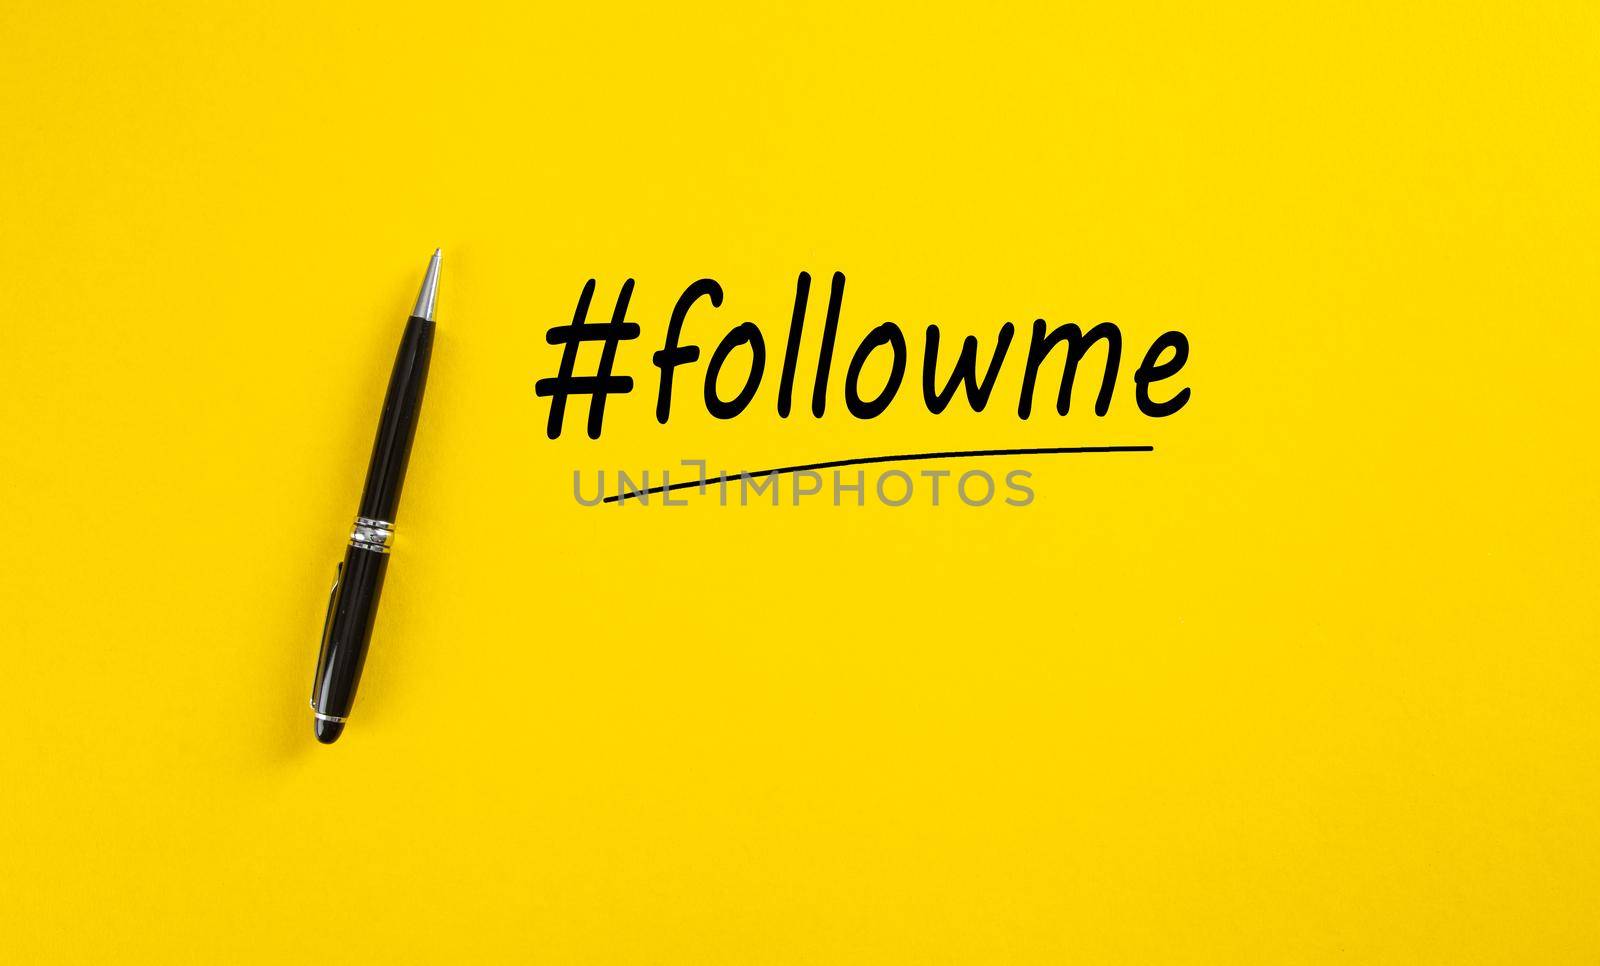 Word follow me or hashtag followme hand written with a black marker pen on yellow background.